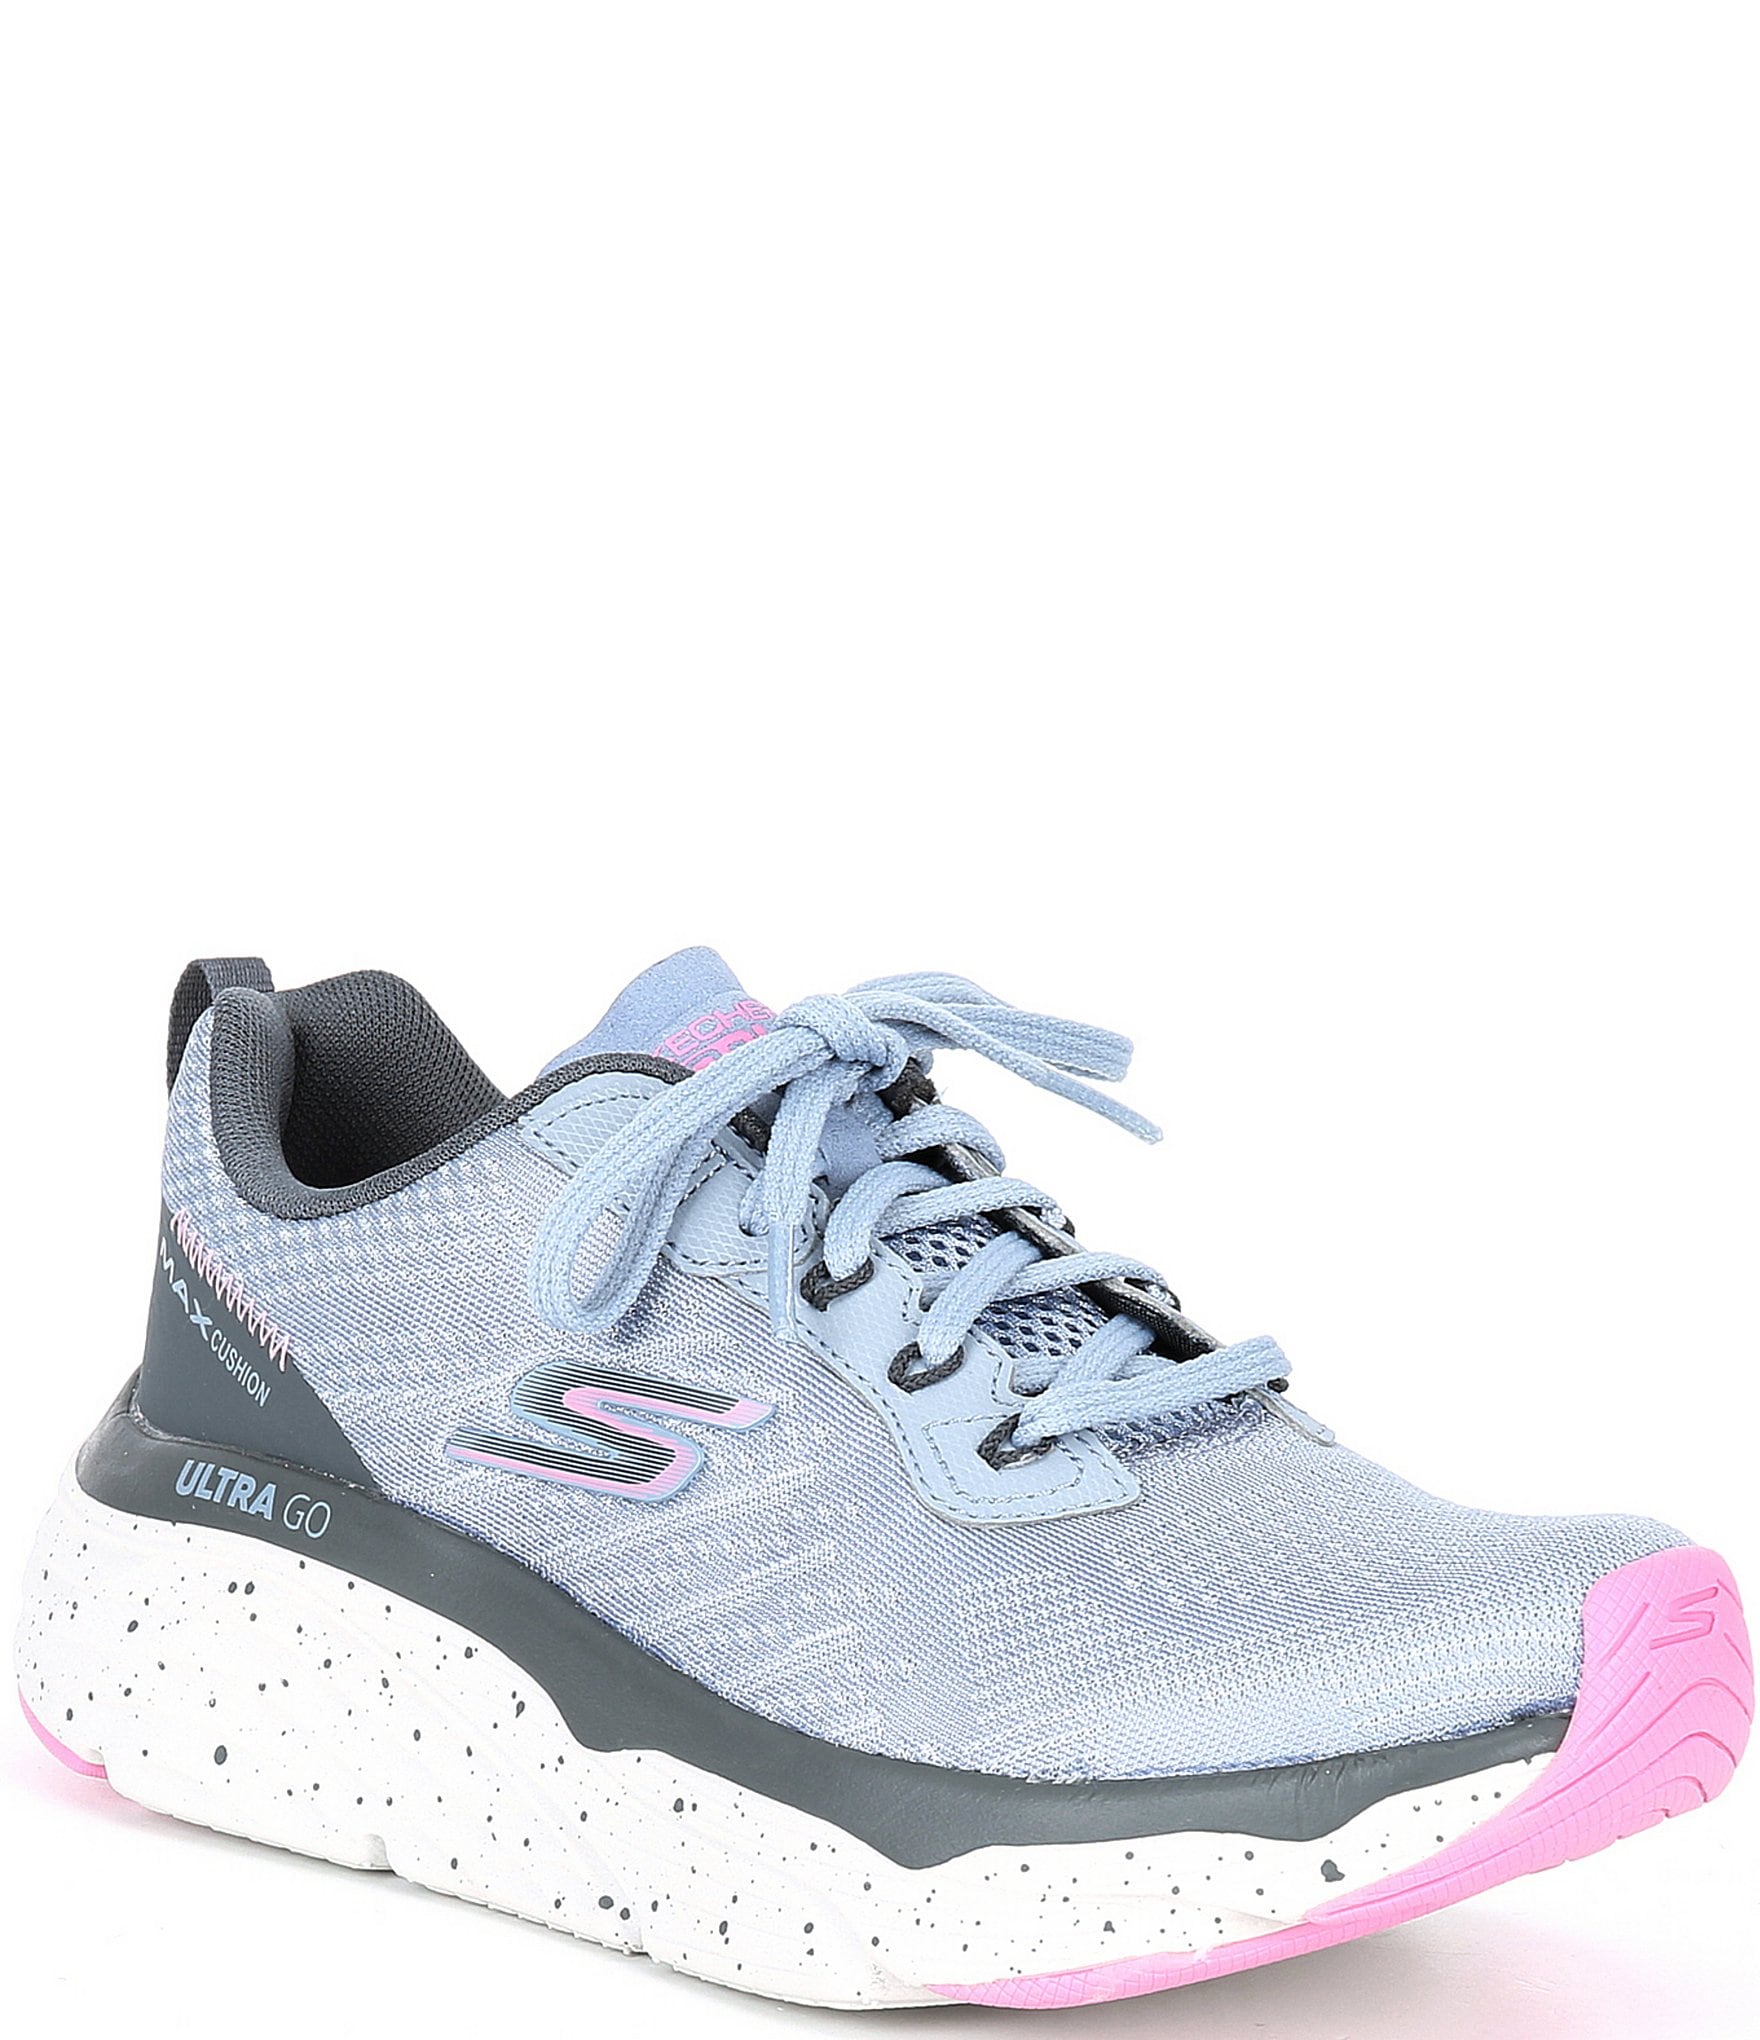 Skechers Women's Max Cushioning Elite Lace-Up Sneakers